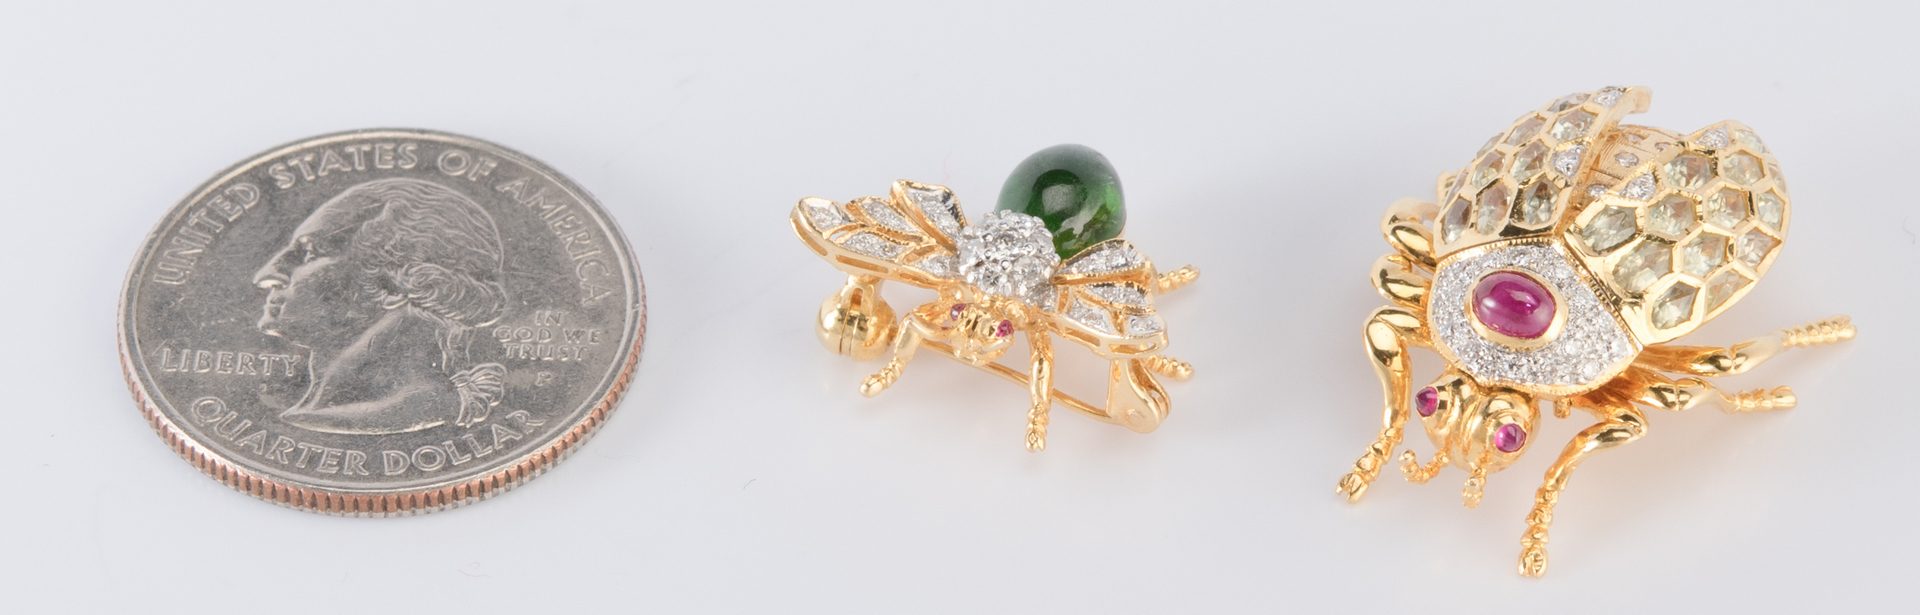 Lot 315: 2 Jeweled Beetle and Bee Pins